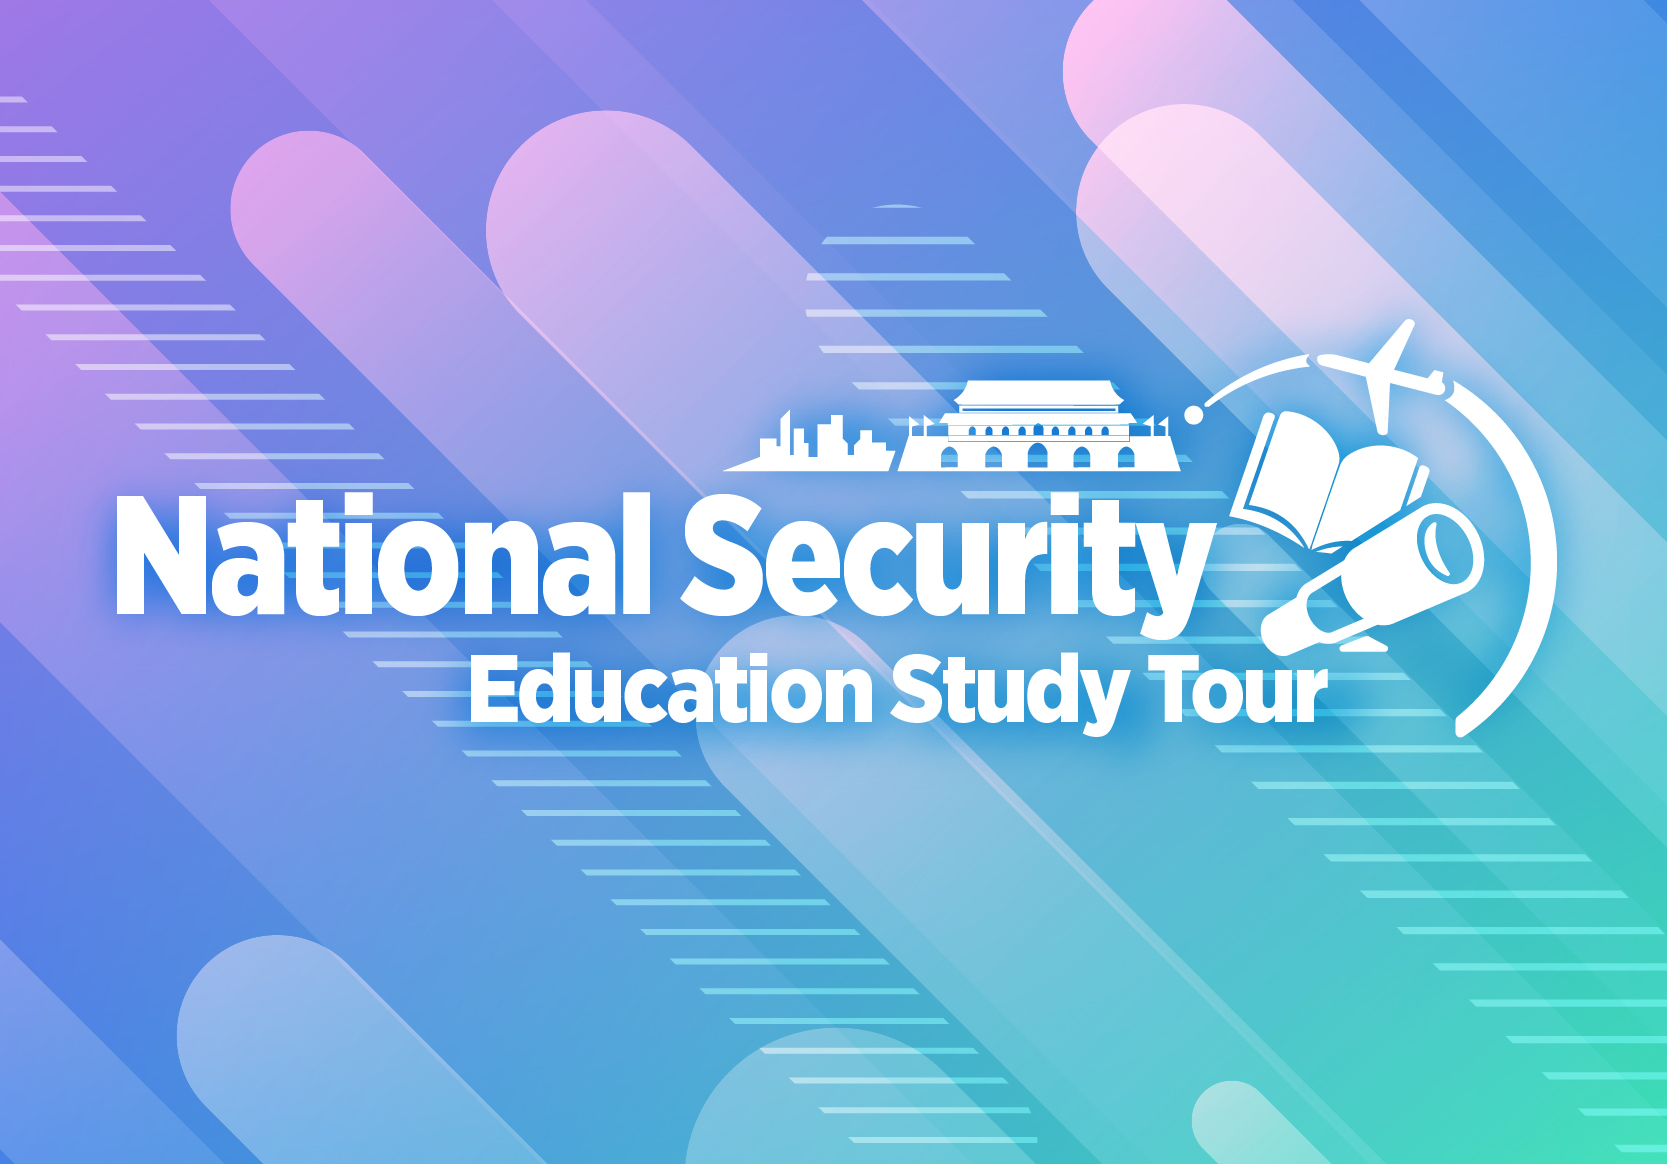 First National Security Education Study Tour